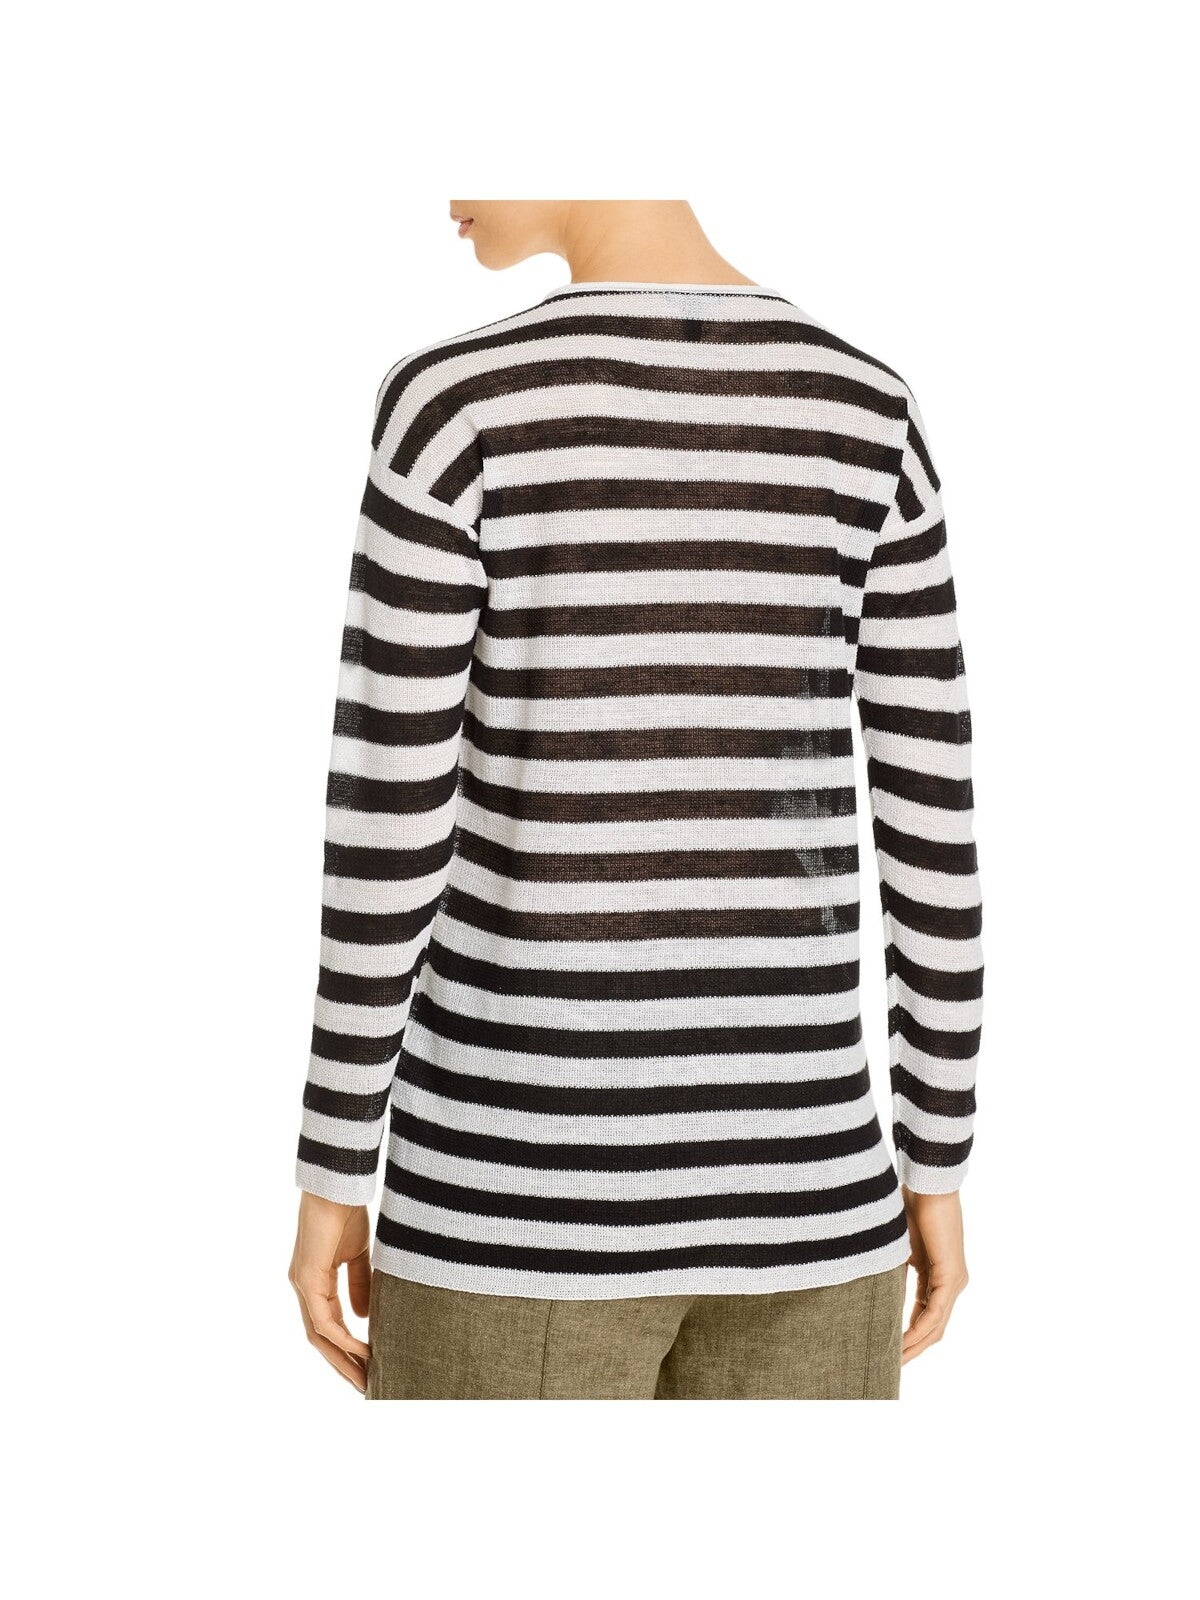 EILEEN FISHER Womens Black Knit Striped Long Sleeve Round Neck Blouse Petites PS \ PP